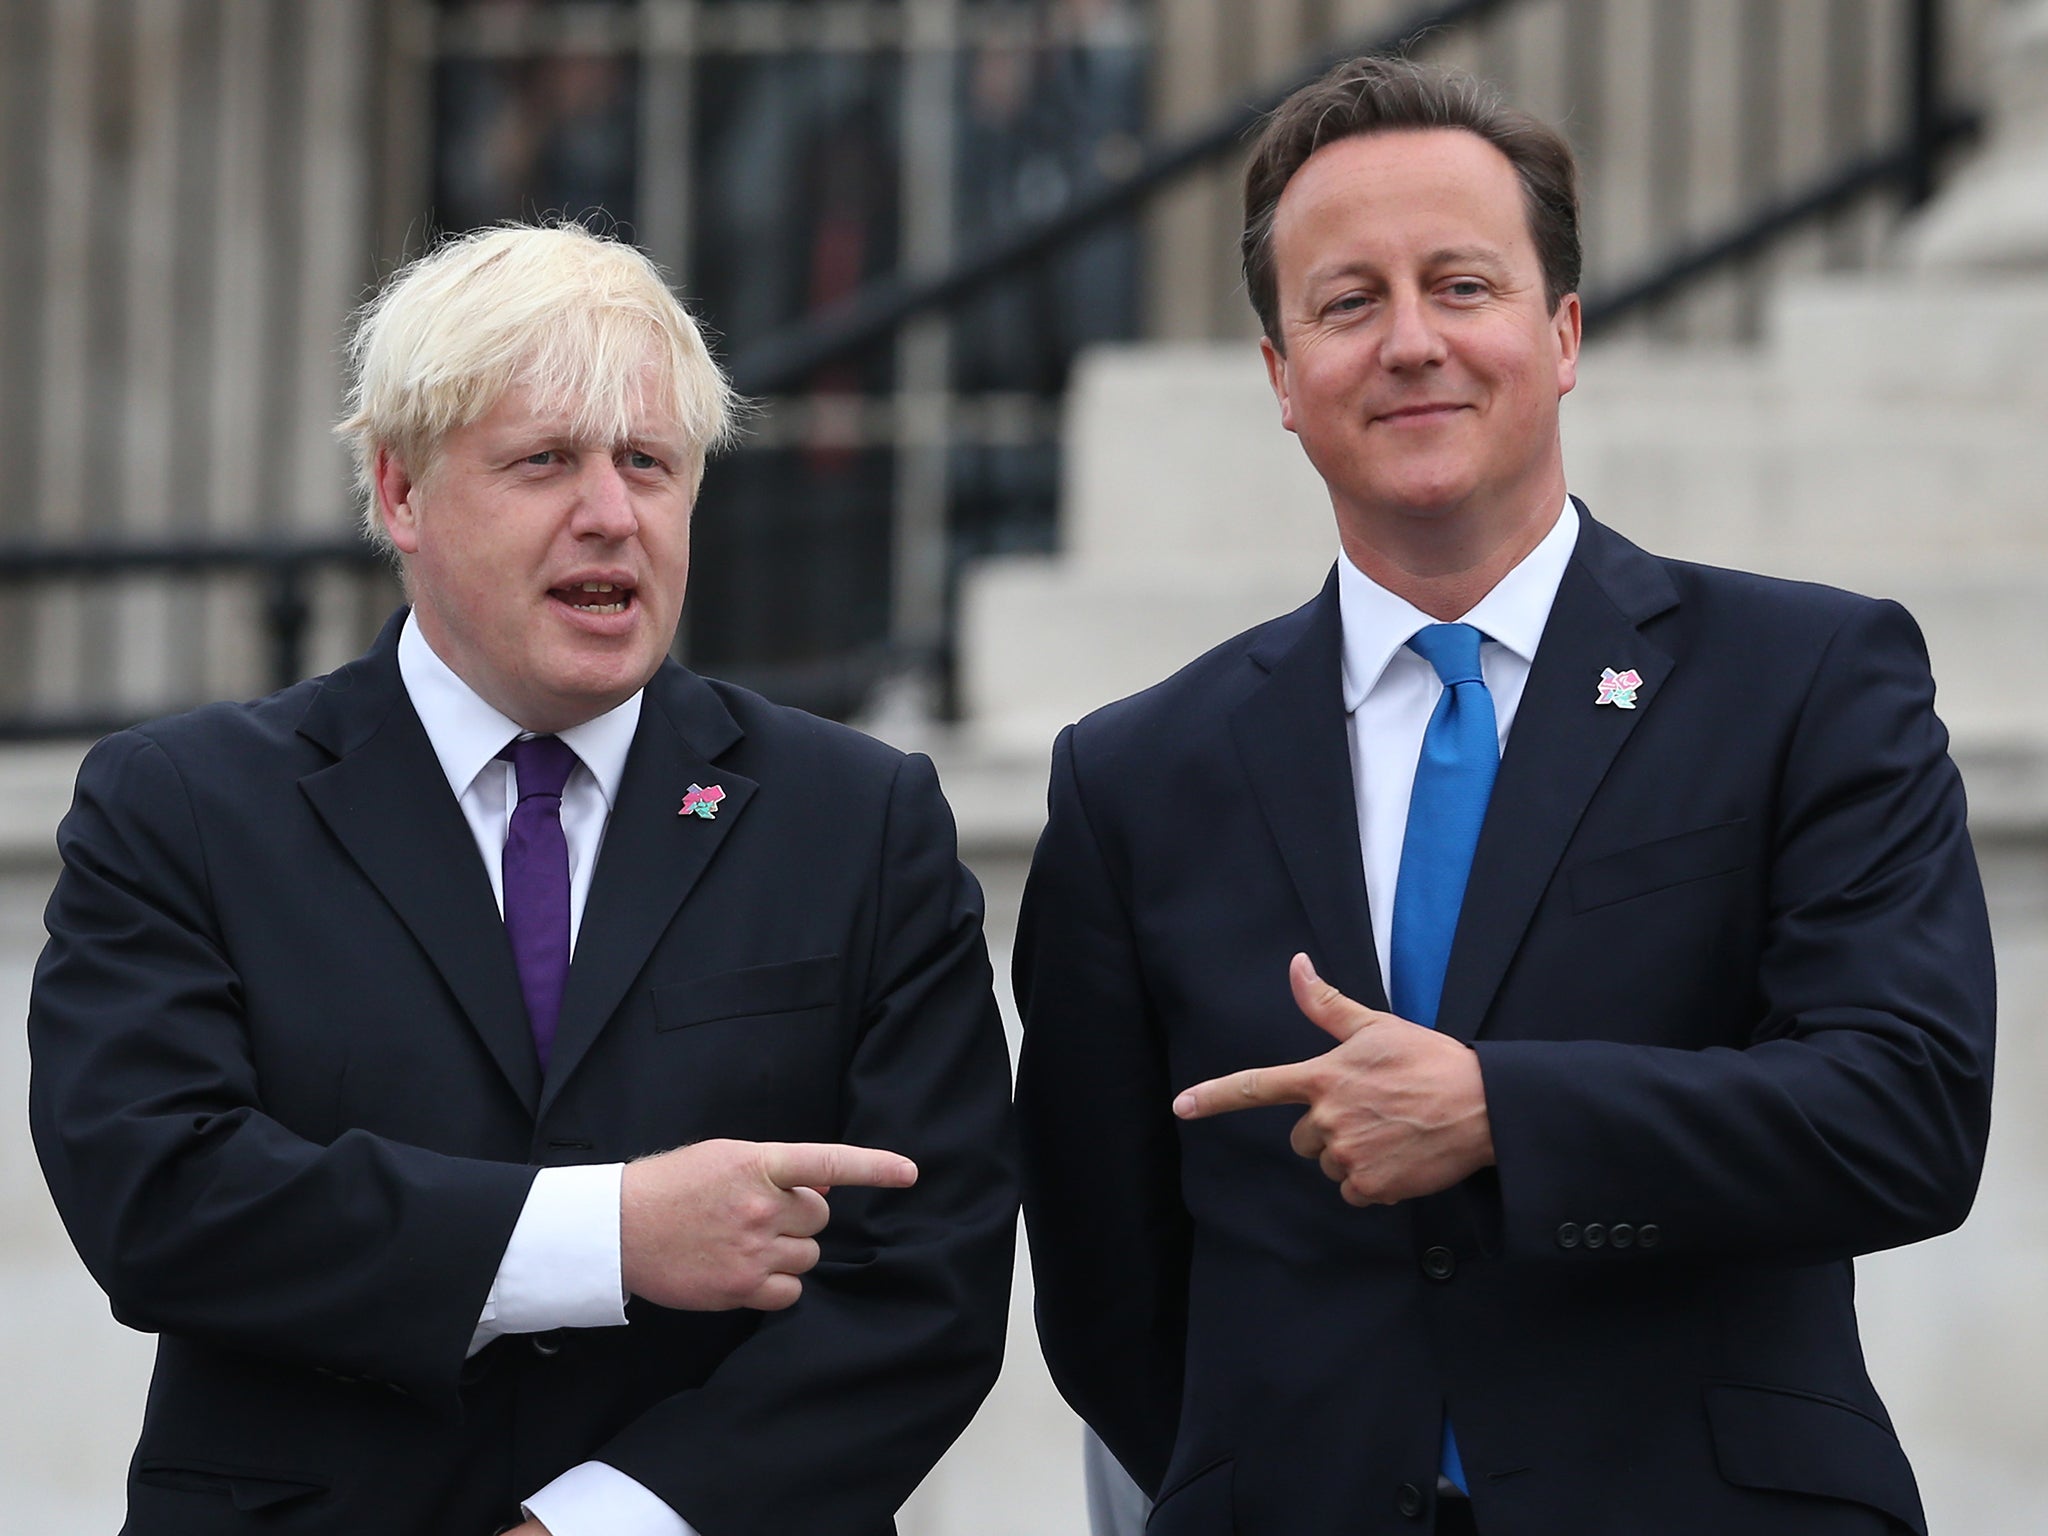 Support for Boris Johnson, left, is on the increase